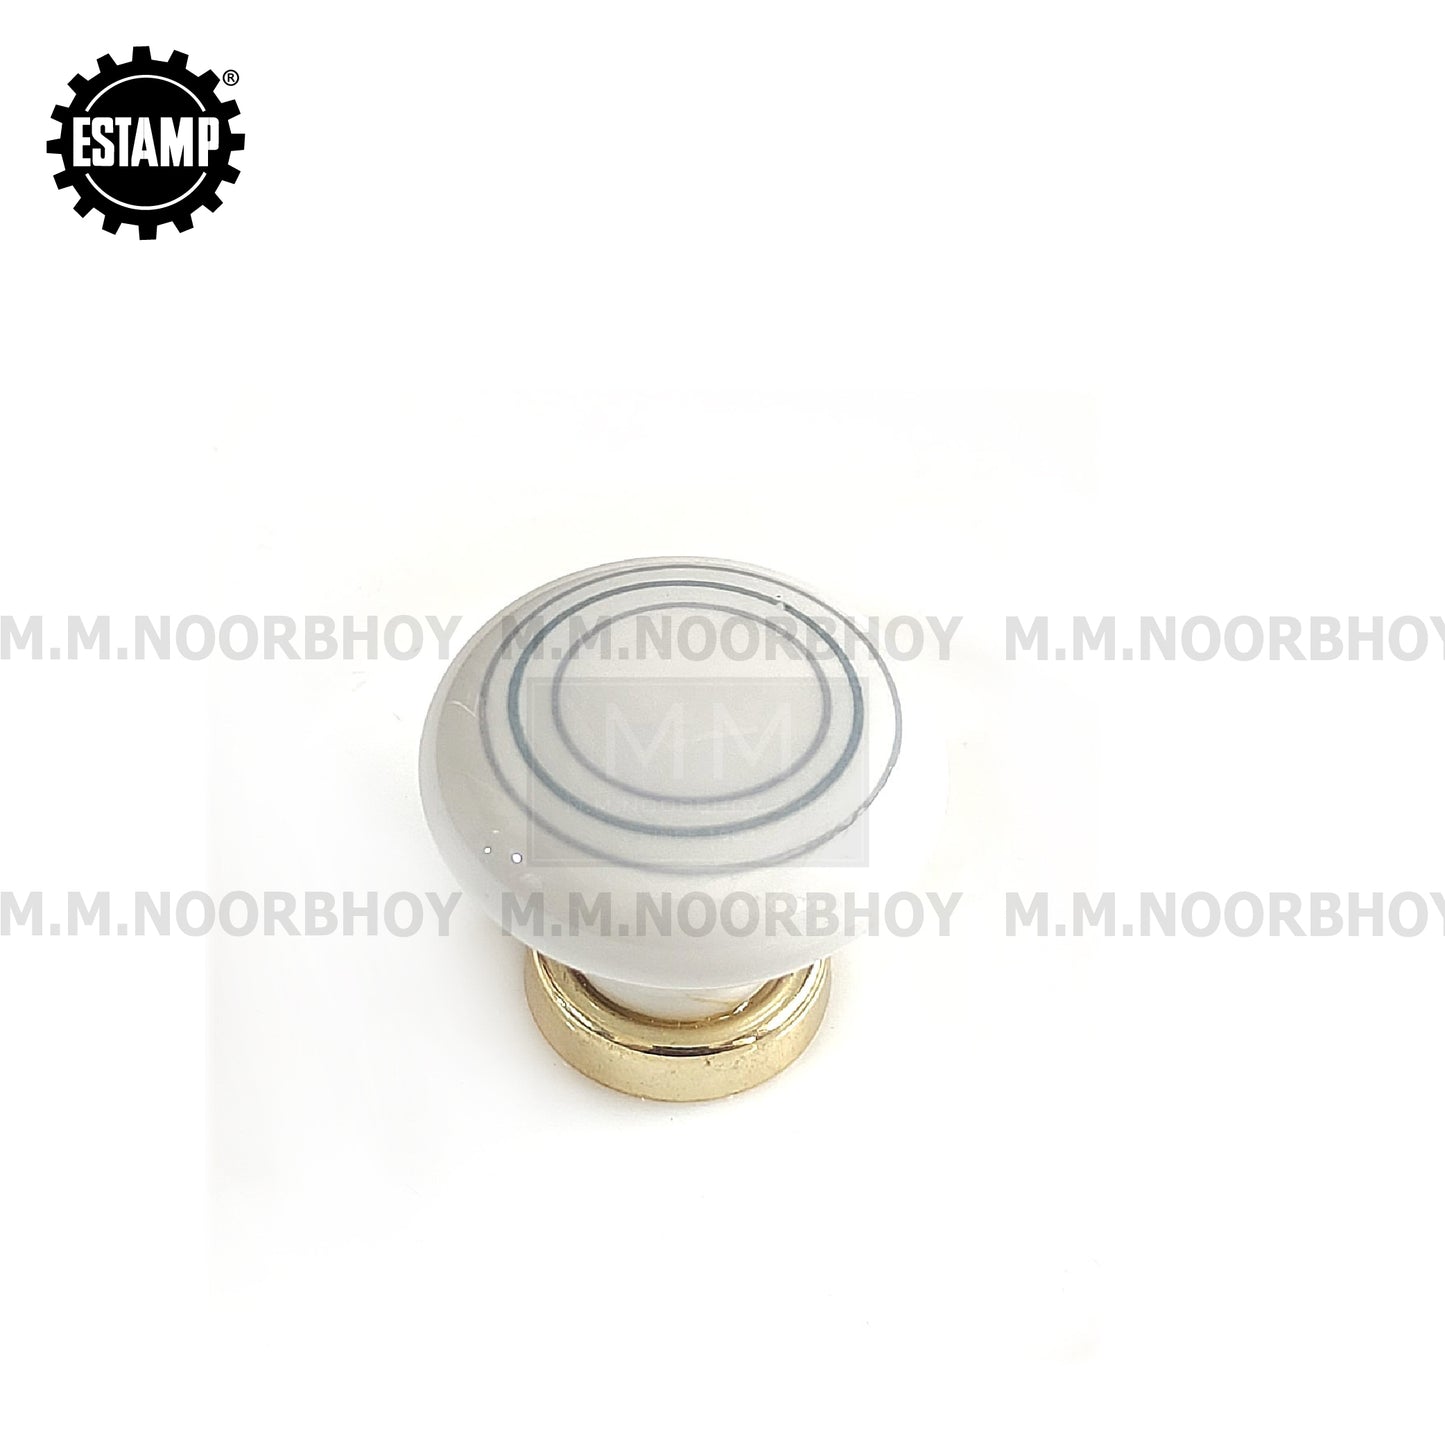 Estamp White Knob with Gold Plated Cabinet Knob Each - 7506.650